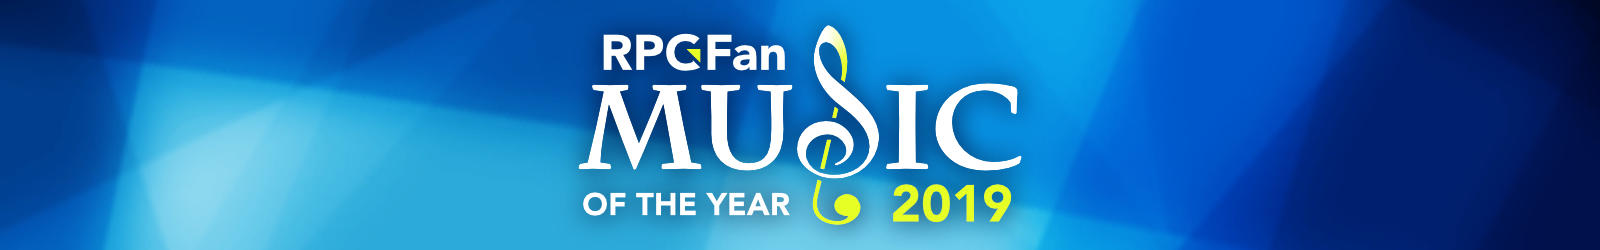 Music of the Year 2019 | RPGFan Feature